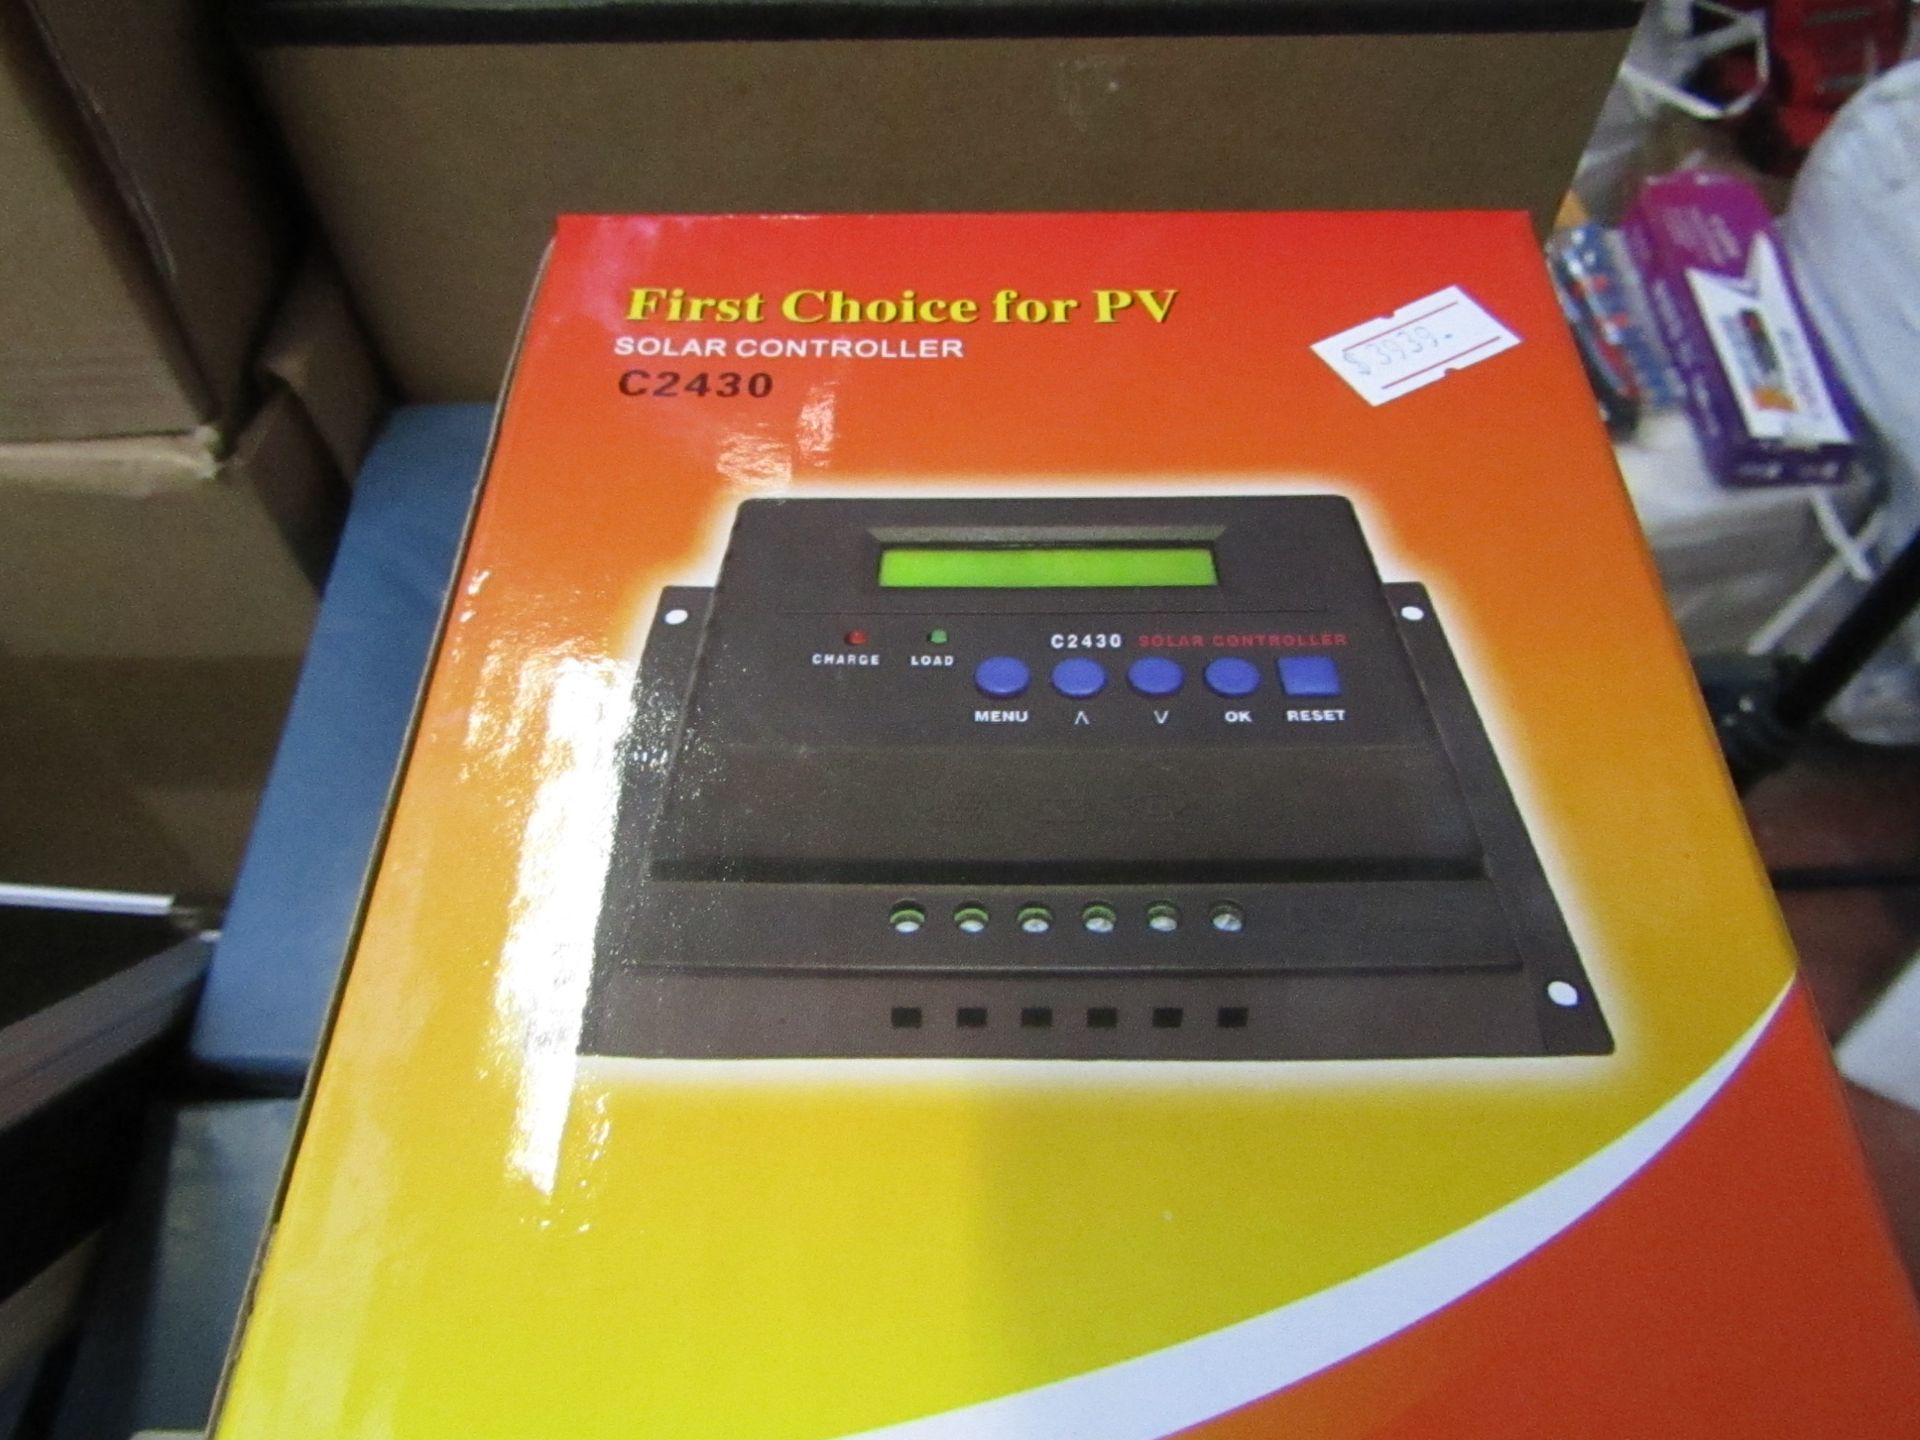 First Choice solar controller, new and boxed.